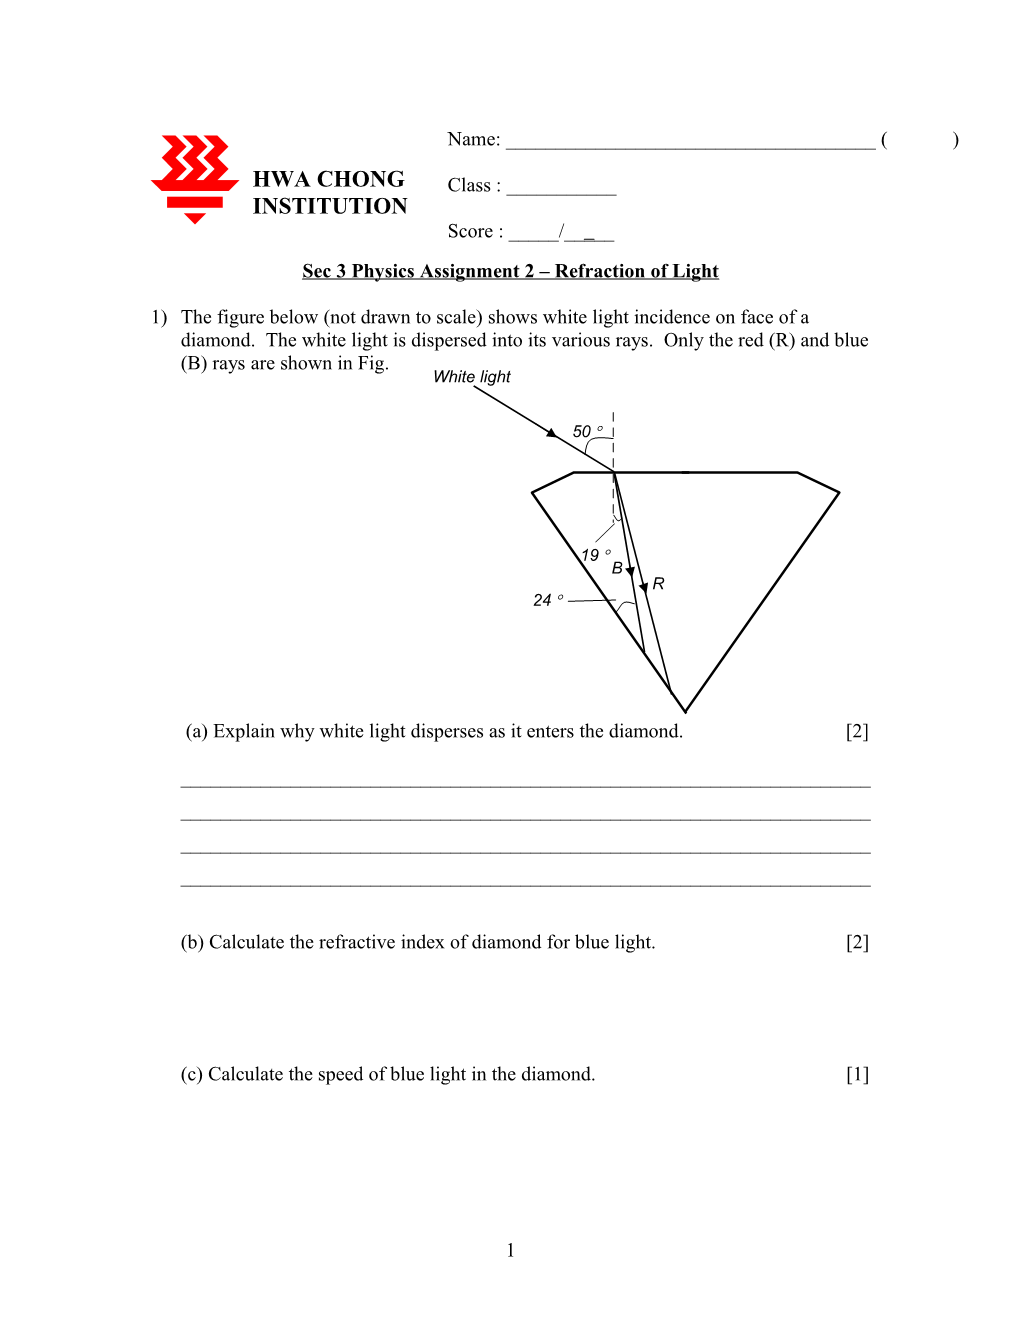 Sec 3 Physics Assignment 2 Refraction of Light